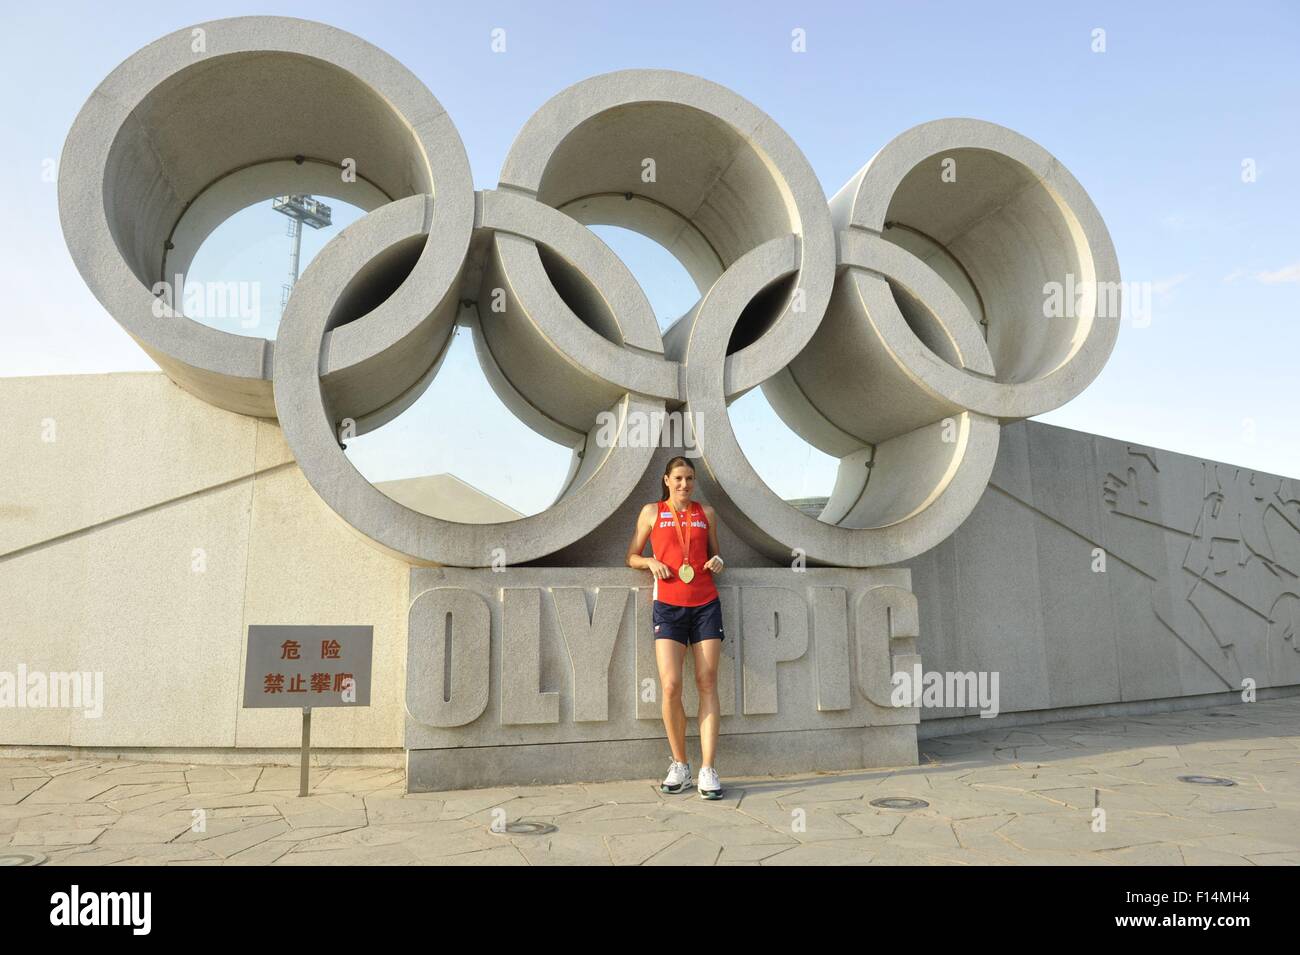 Peking, China. 27th Aug, 2015. Women´s 400m hurdles gold medalist Zuzana Hejnova of the Czech Republic poses with her medal from the World Athletics Championships in Beijing, China, August 26, 2015. © Tibor Alfoldi/CTK Photo/Alamy Live News Stock Photo